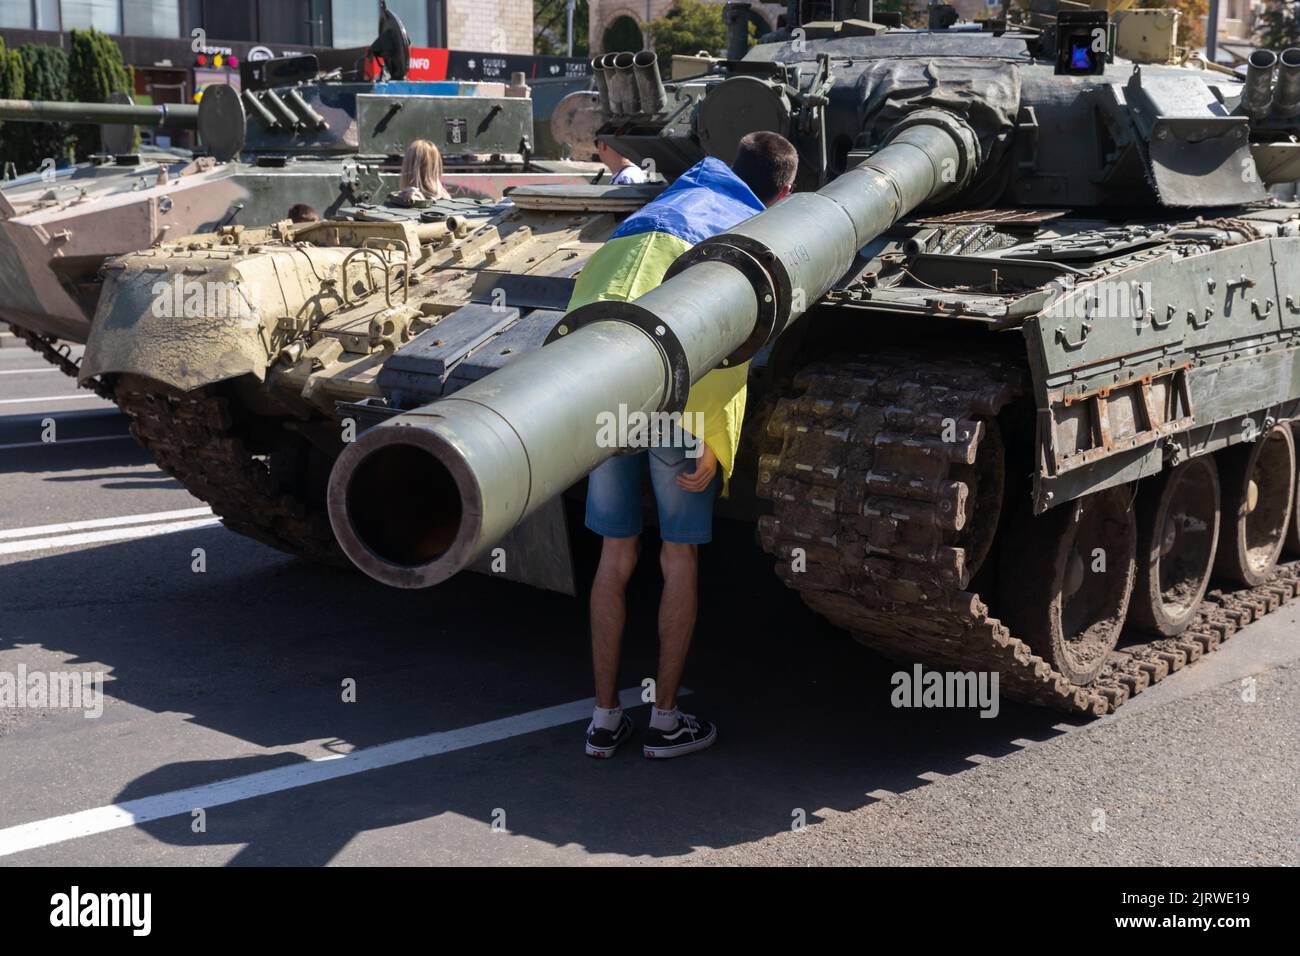 A man wrapped with a Ukrainian flag looks at a destroyed Russian tank. An exhibition of destroyed Russian equipment is being organized at Khreshchatyk. Six months ago, Russian military troops were deployed by Russian president Vladimir Putin to invade Ukraine. He reportedly reckoned that they would capture Kyiv in three days, Stock Photo